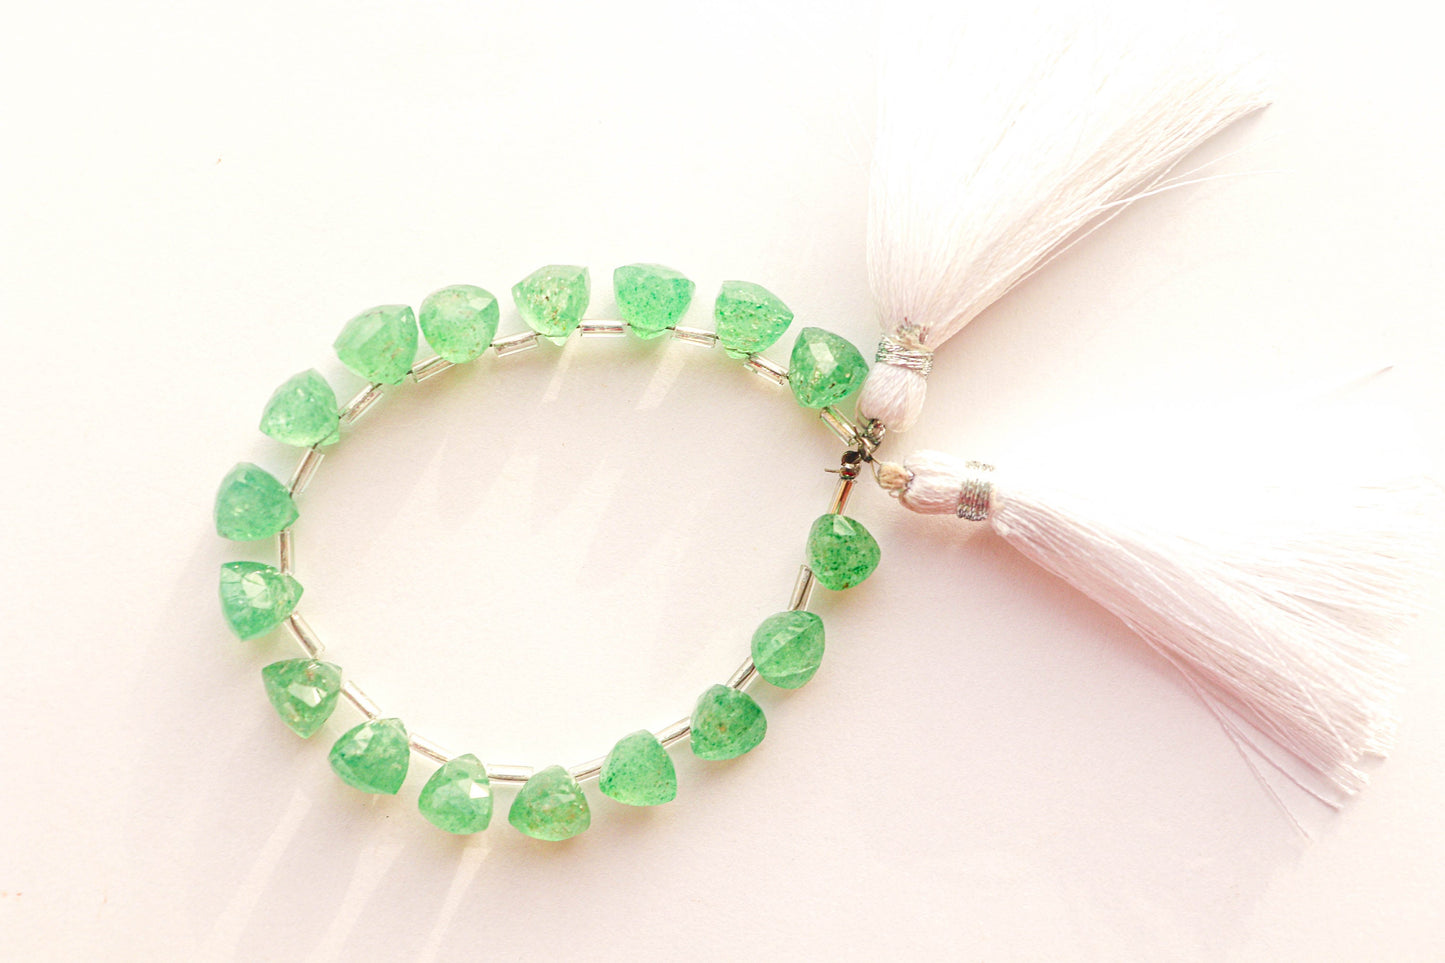 Green Strawberry Quartz 3D Trillion Shape Beads, Natural Gemstone Beads for Jewelry Making, Beadsforyourjewellery